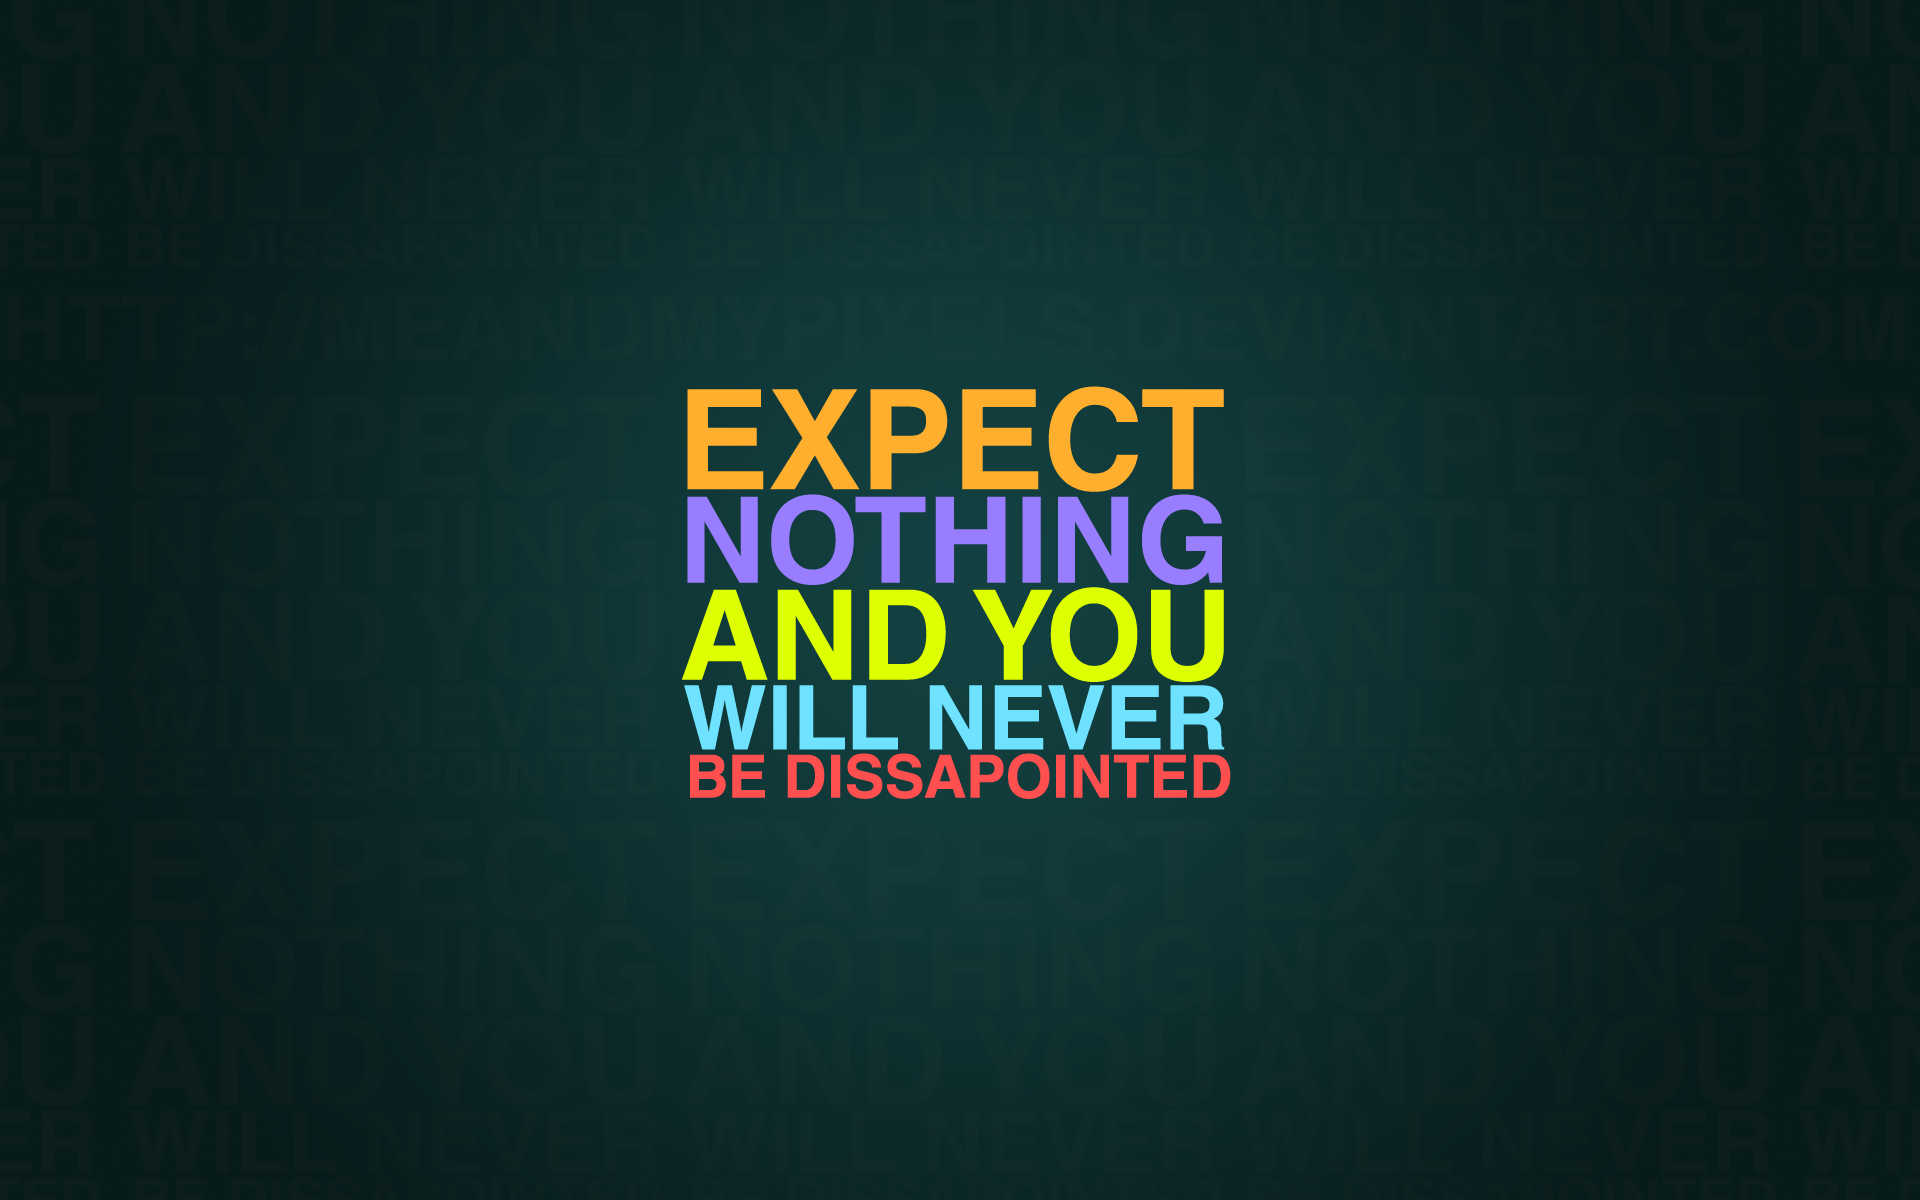 Expect nothing and you will never be disappointed #motivational